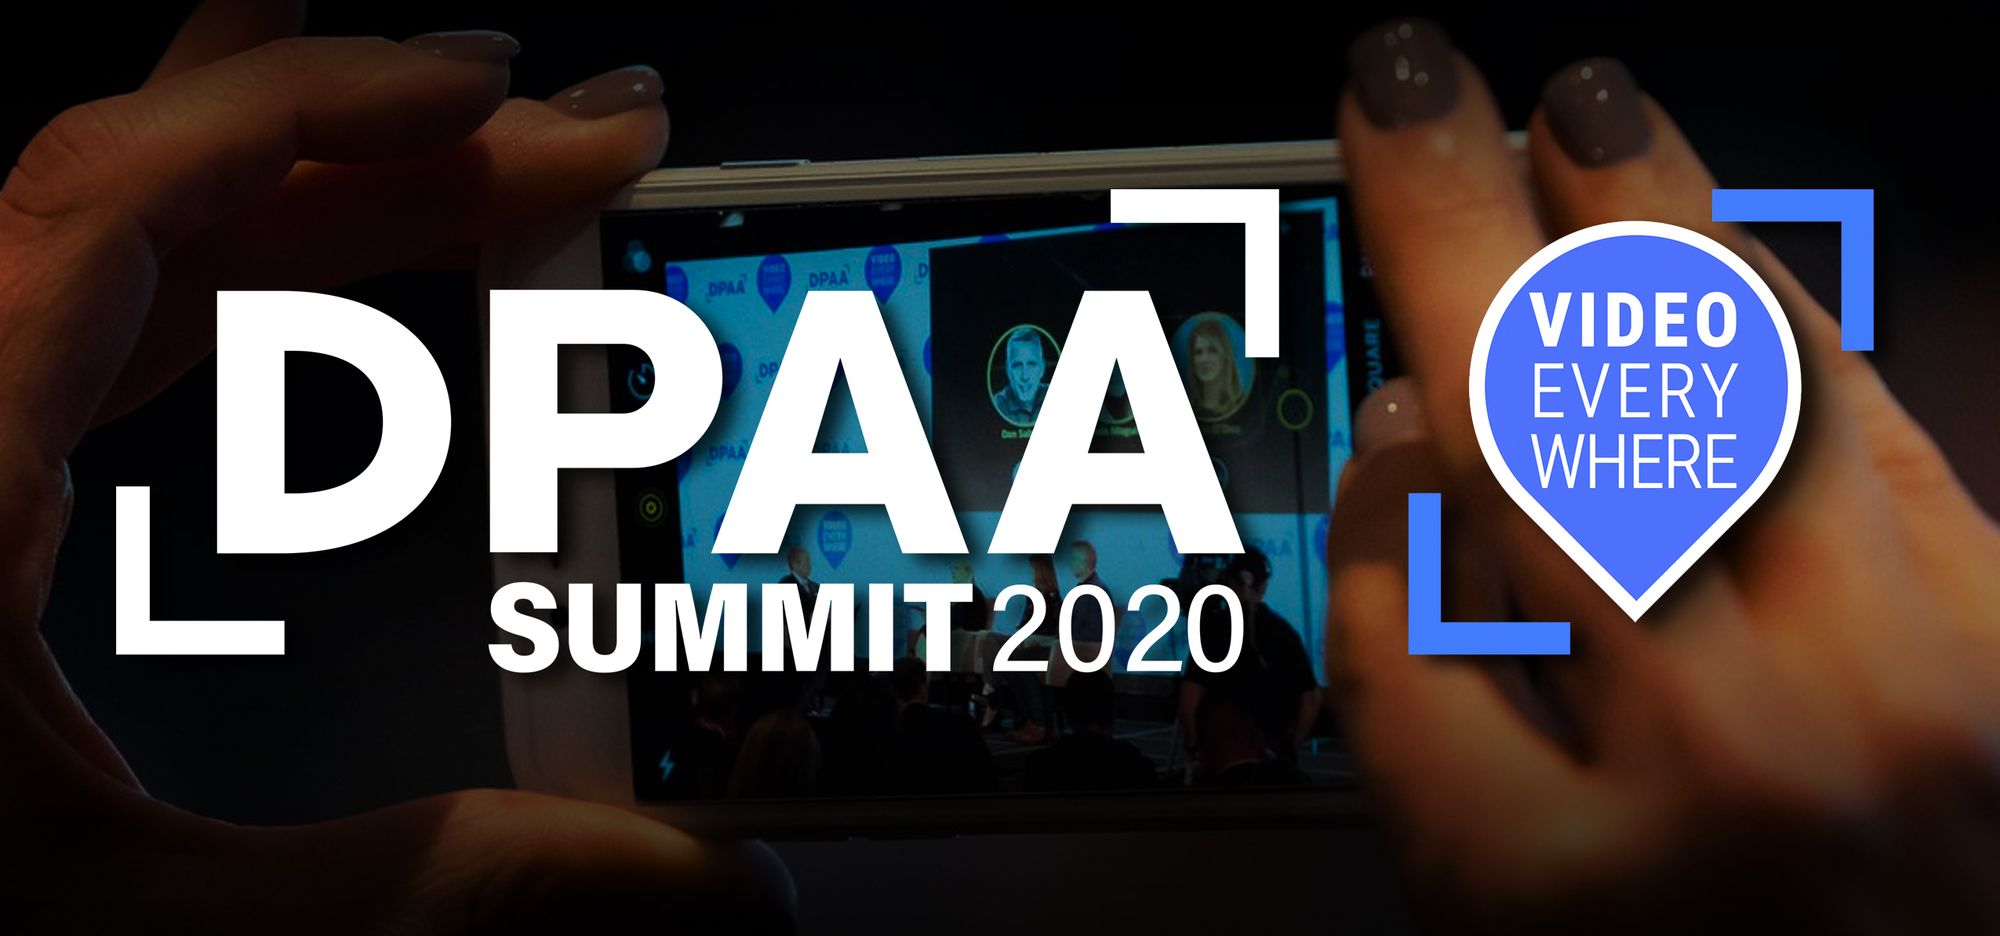 DPAA to hold its annual global Video Everywhere Summit live-via-Zoom in October